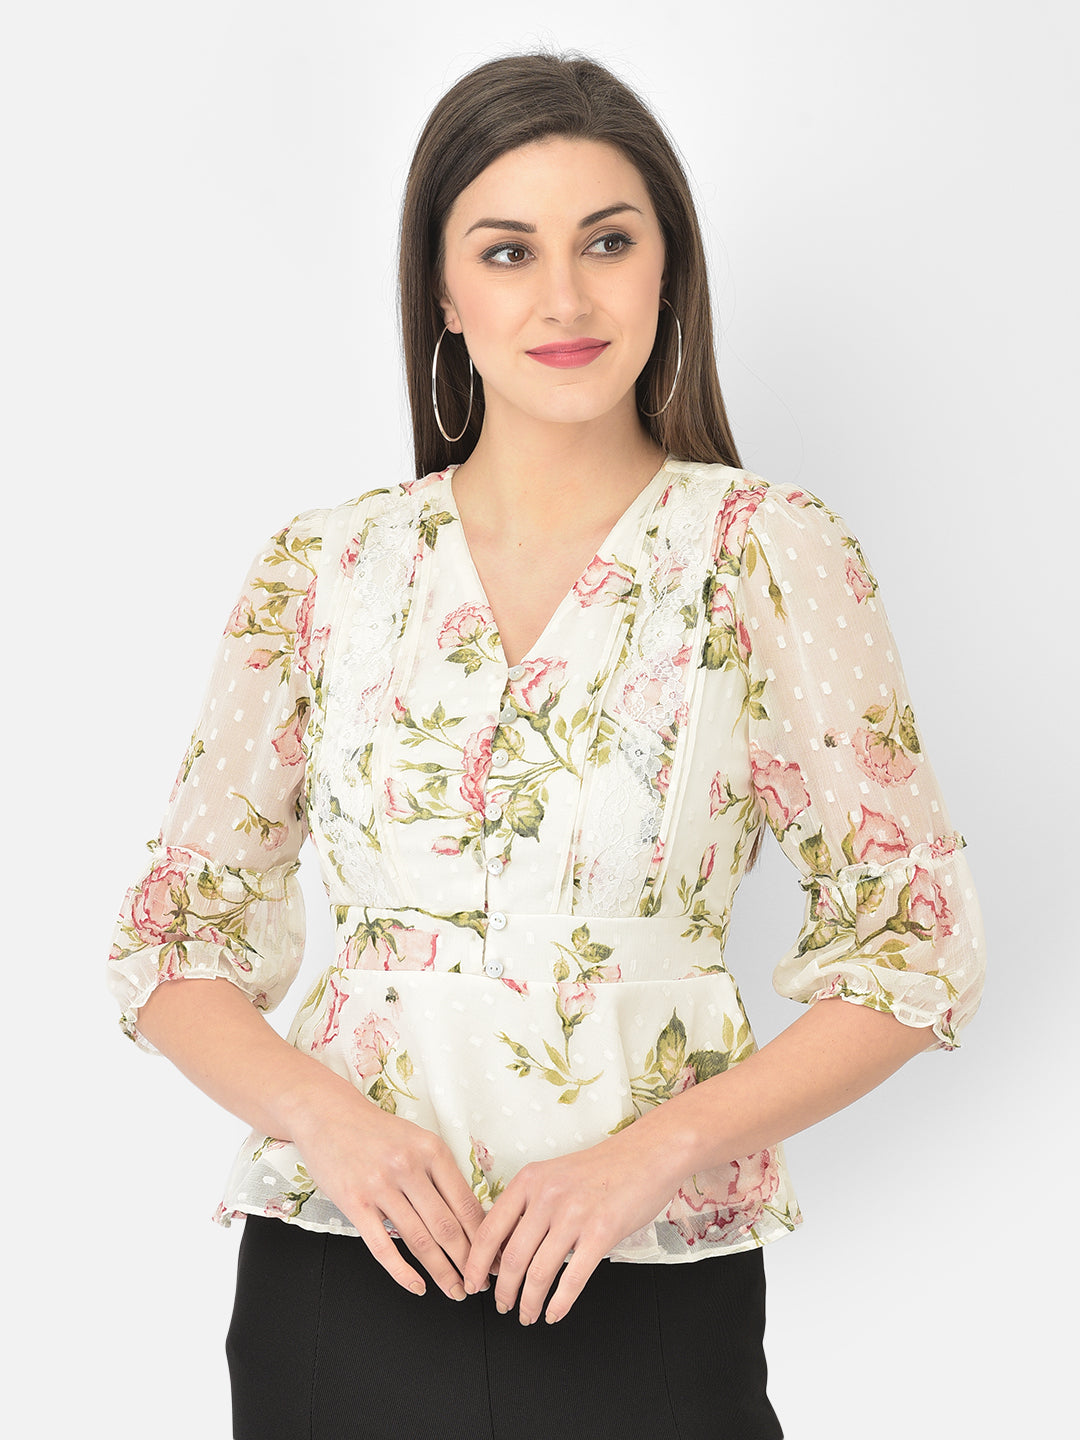 Ivory Floral Printed V-Neck With Puffer Sleeves Peplum Top